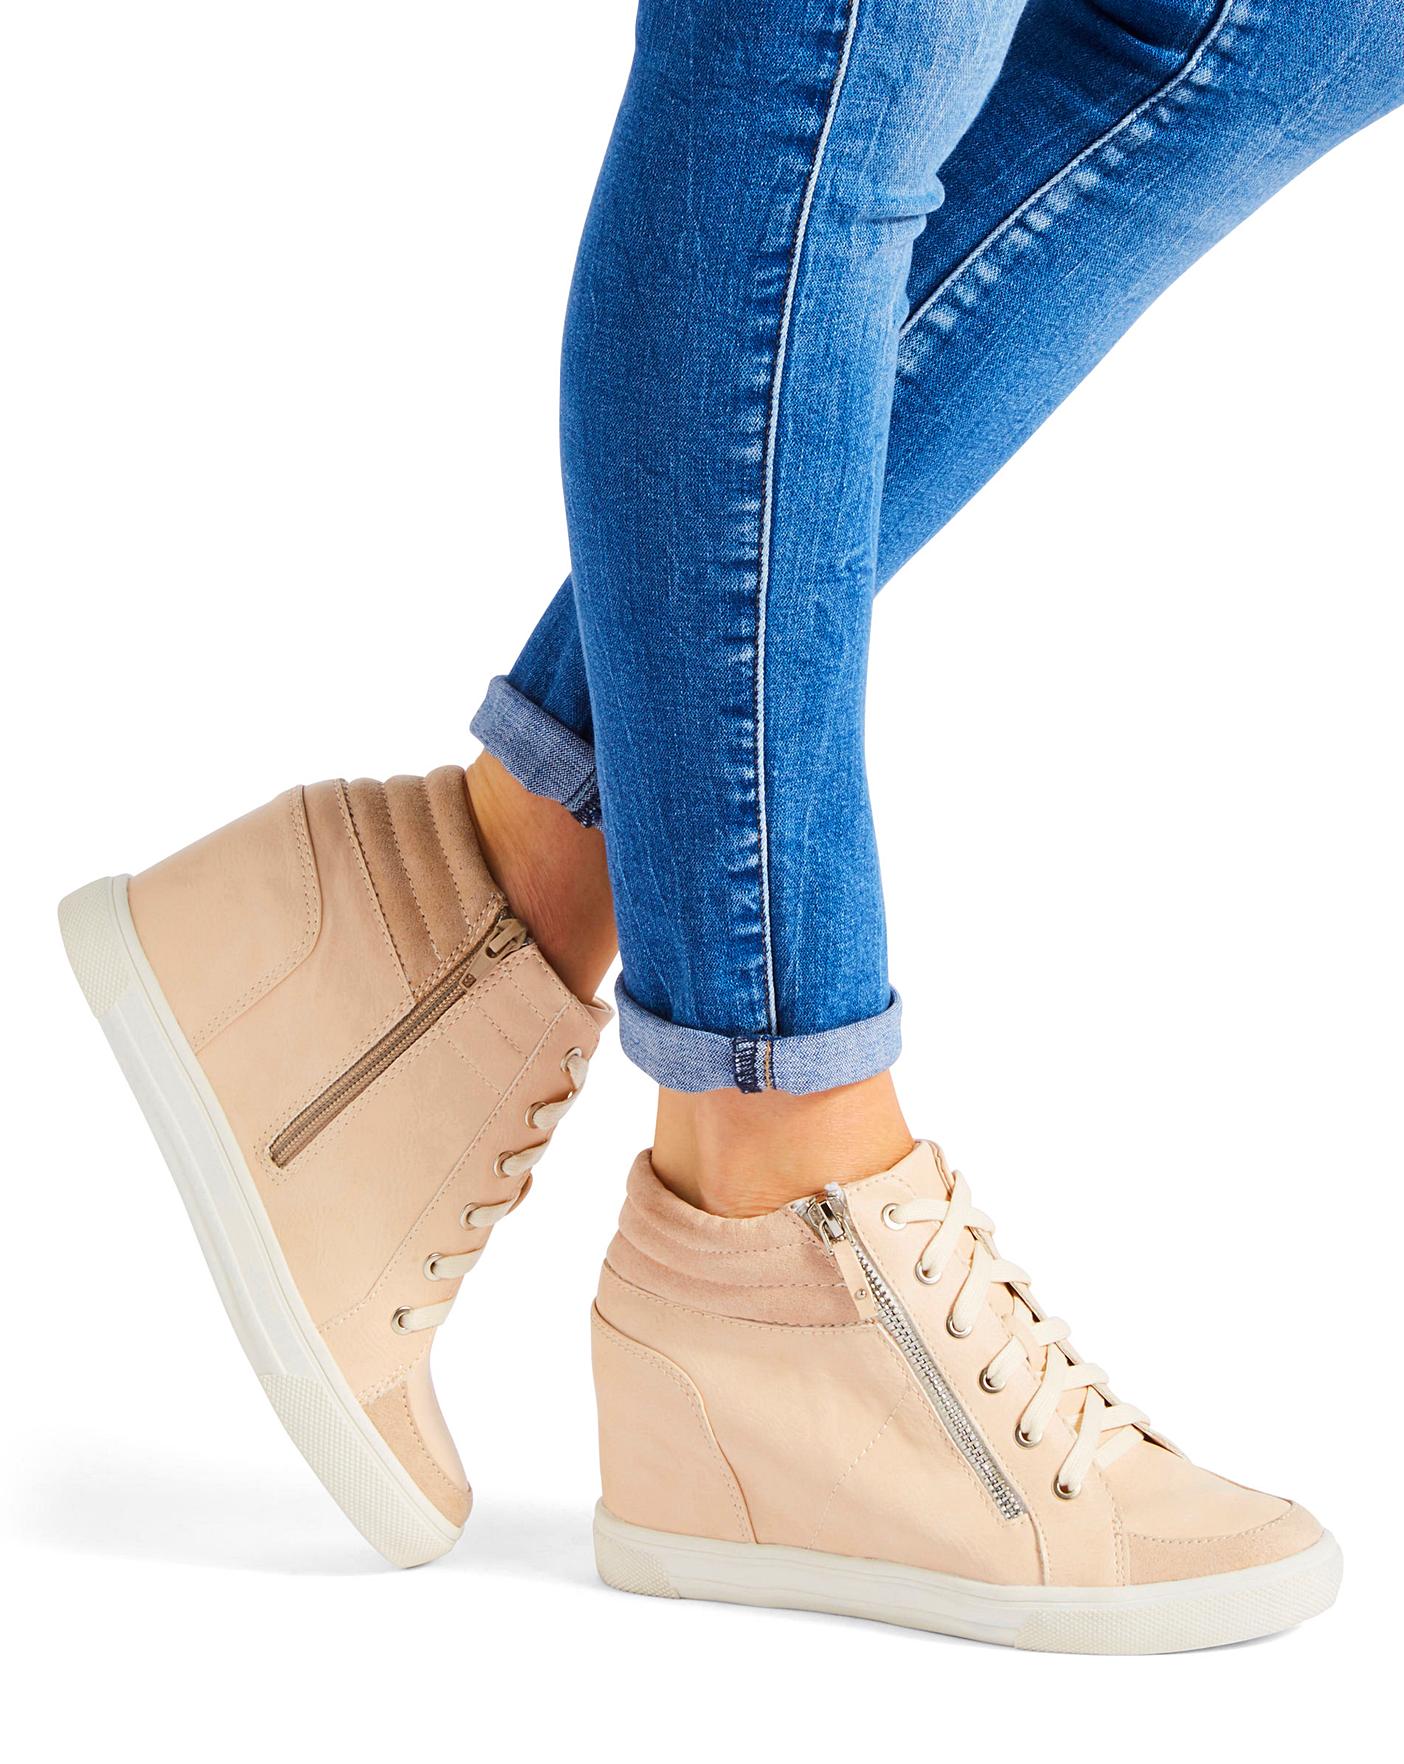 Leila Wedge Trainer Wide Fit | J D Williams